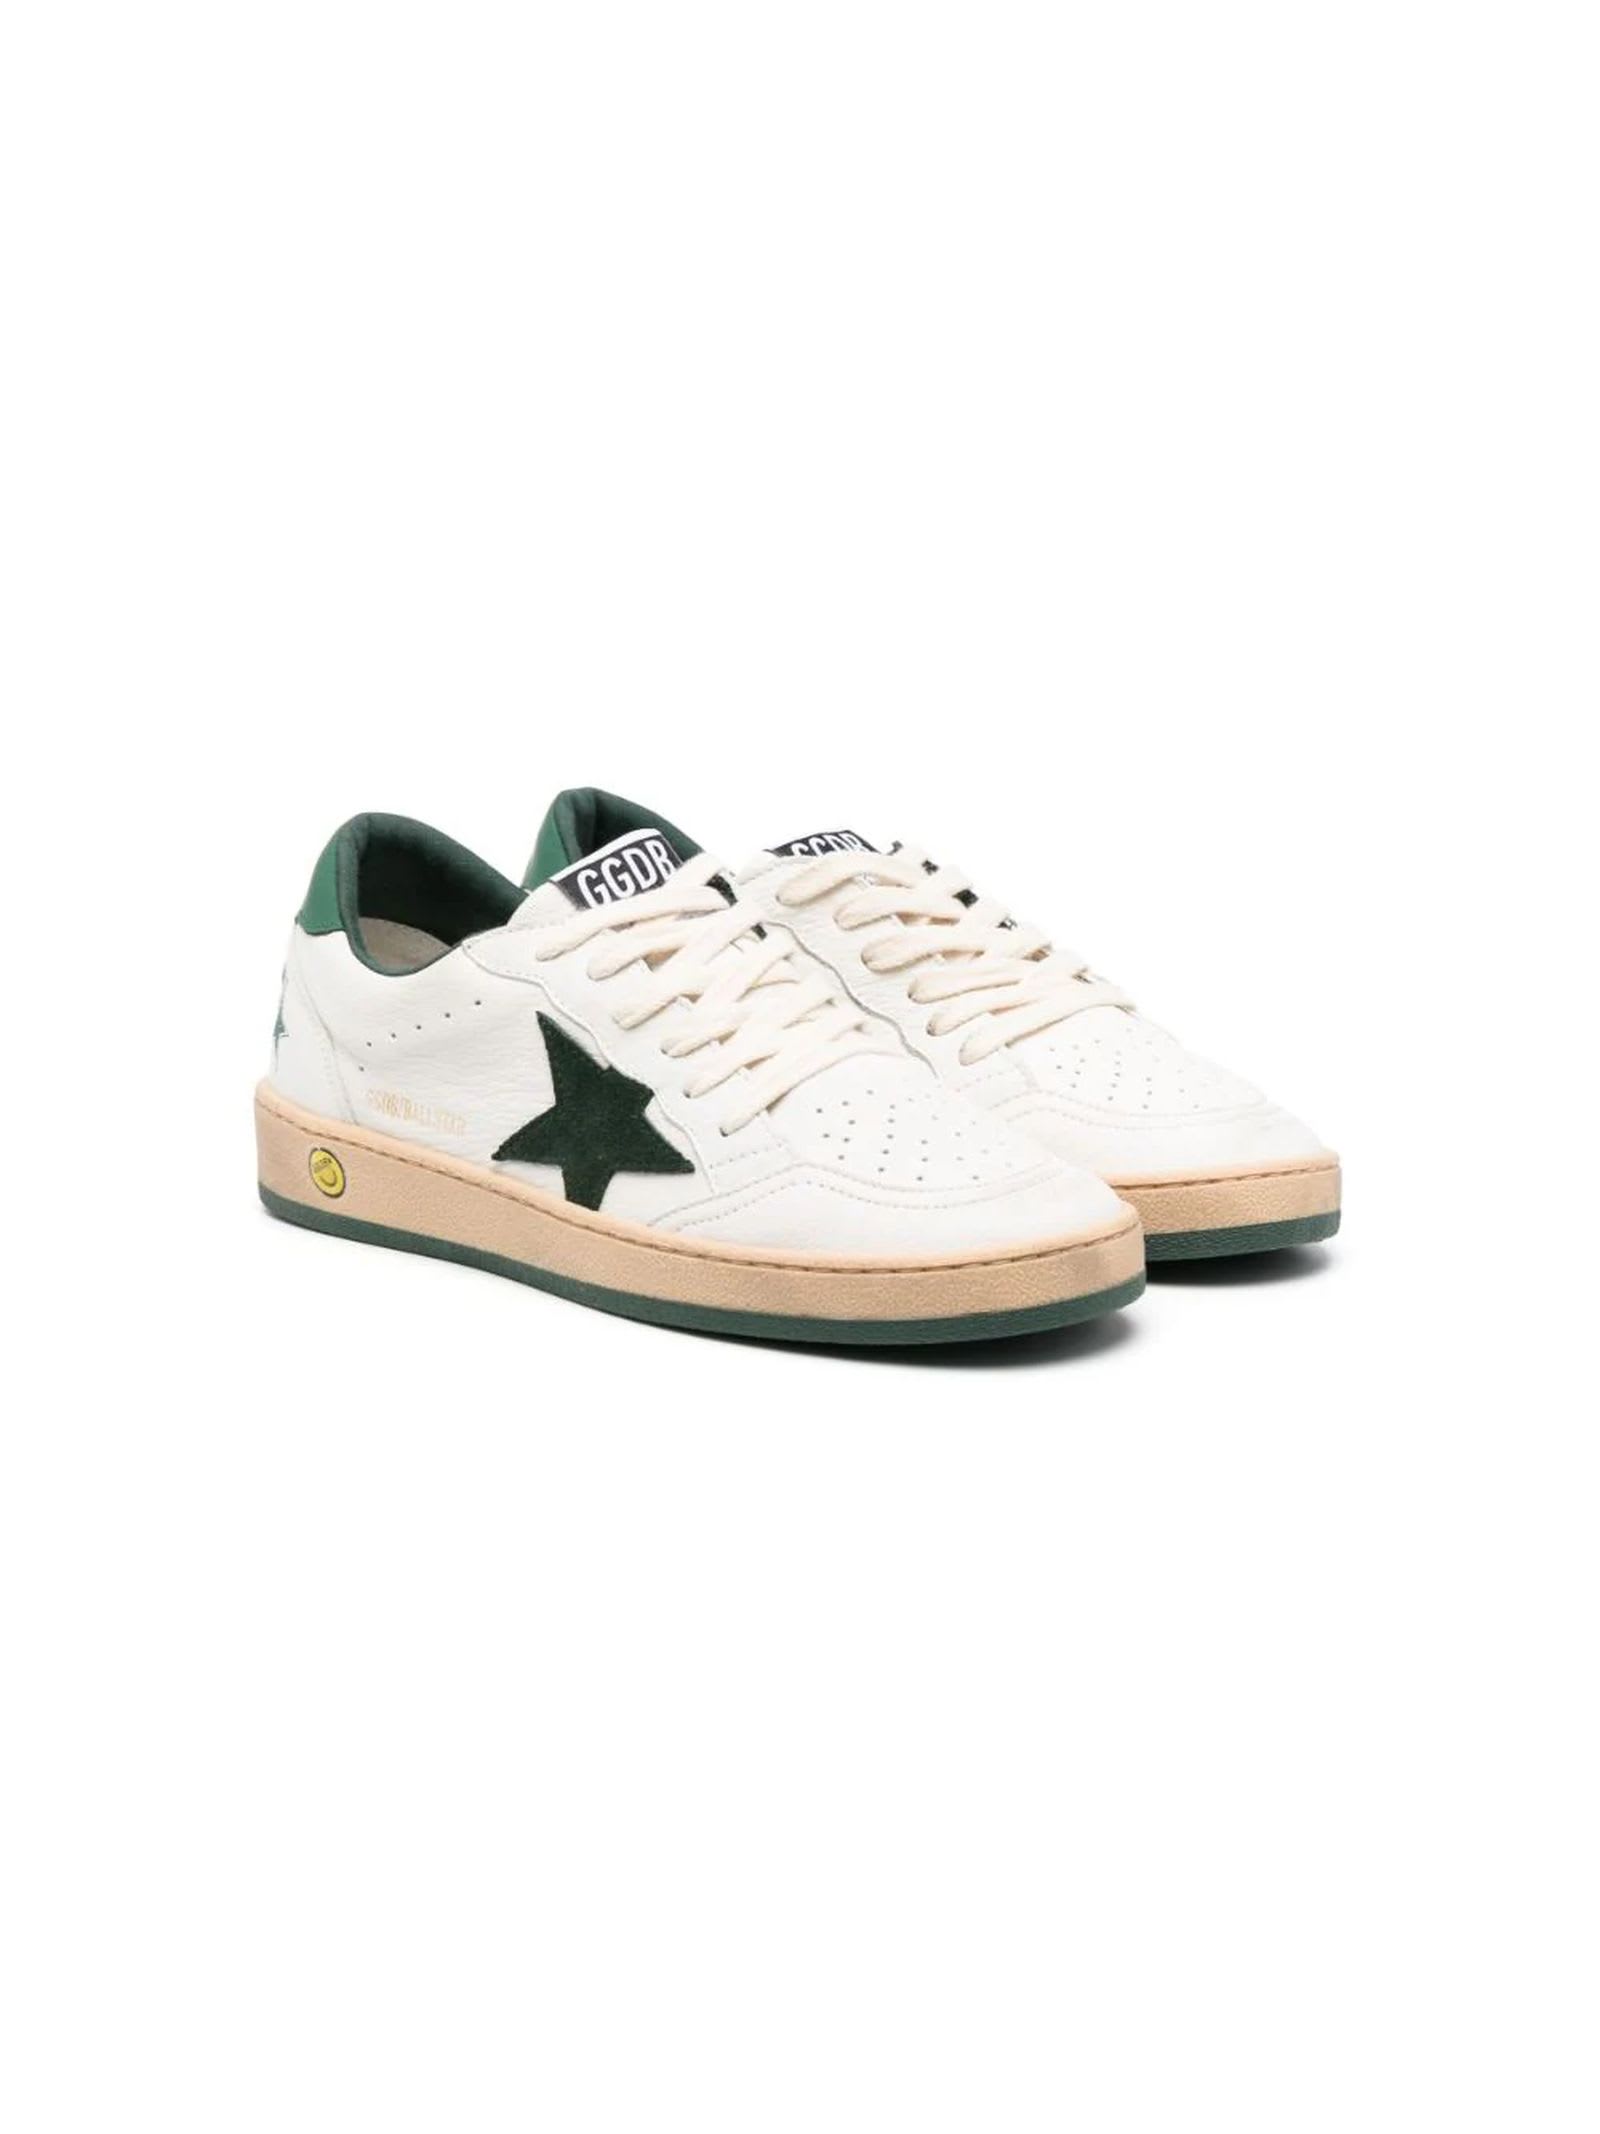 Golden Goose Off-white Calf Leather Sneakers